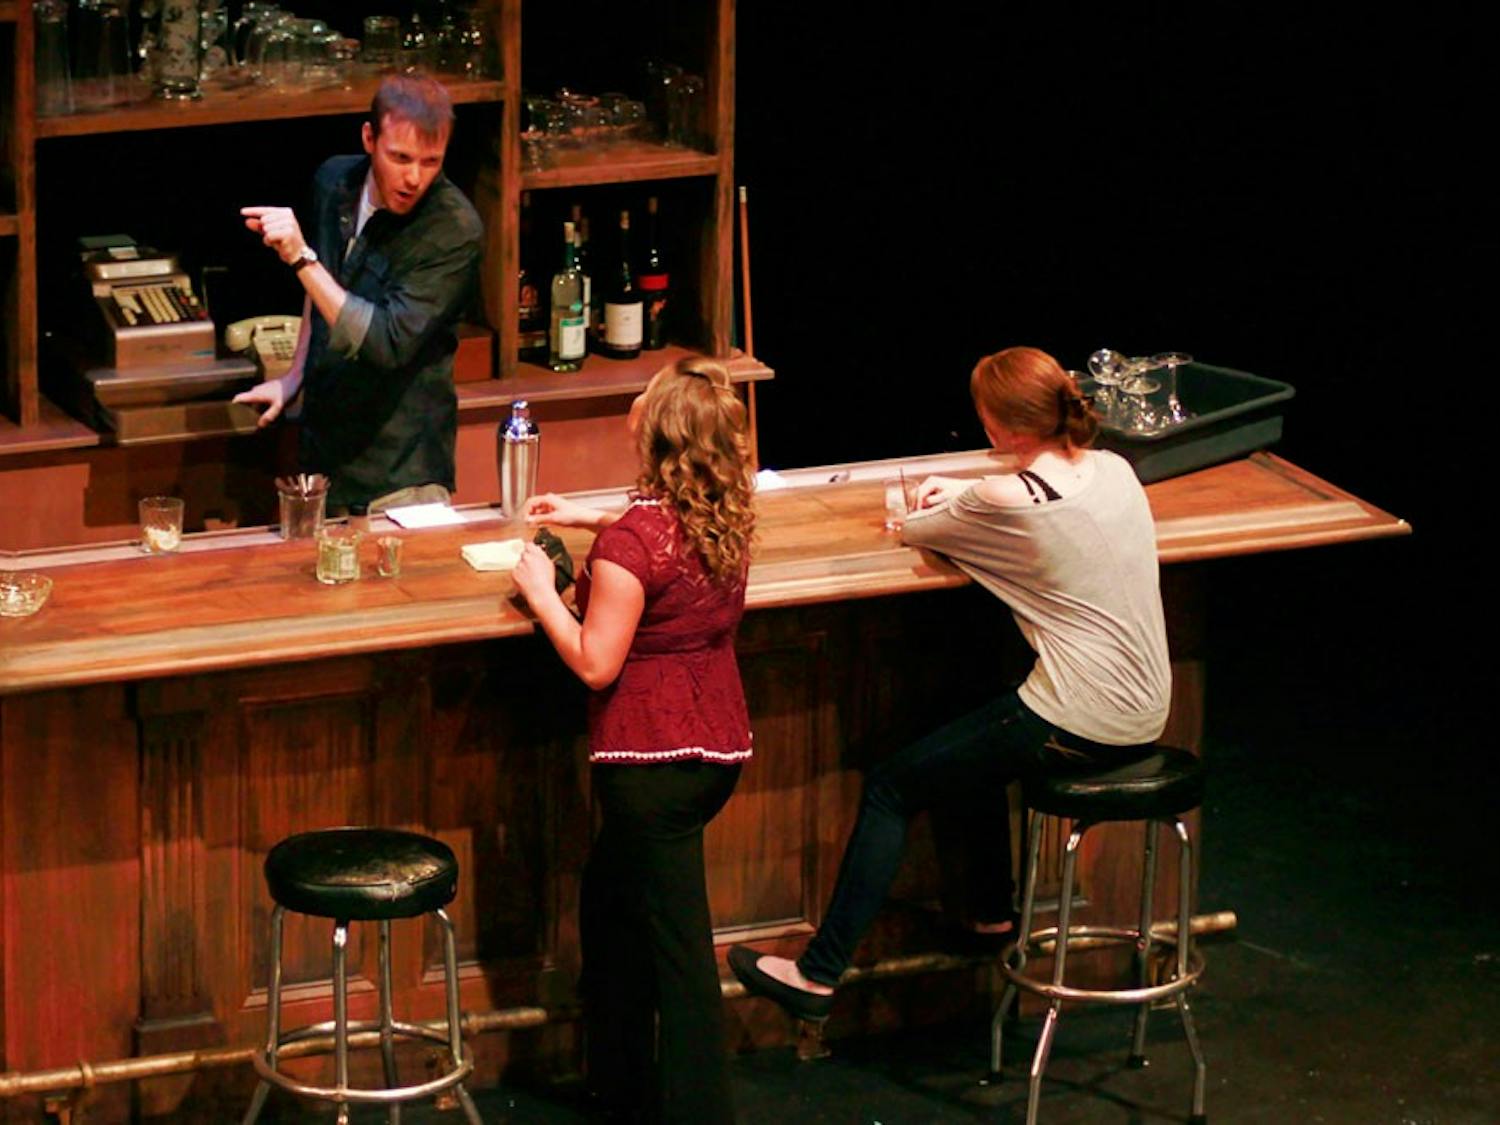 A bar in NYC set the stage for the student production of “Savage in Limbo,” a play about a group of friends that frequents the bar and discusses the trials and tribulations of being out on their own.